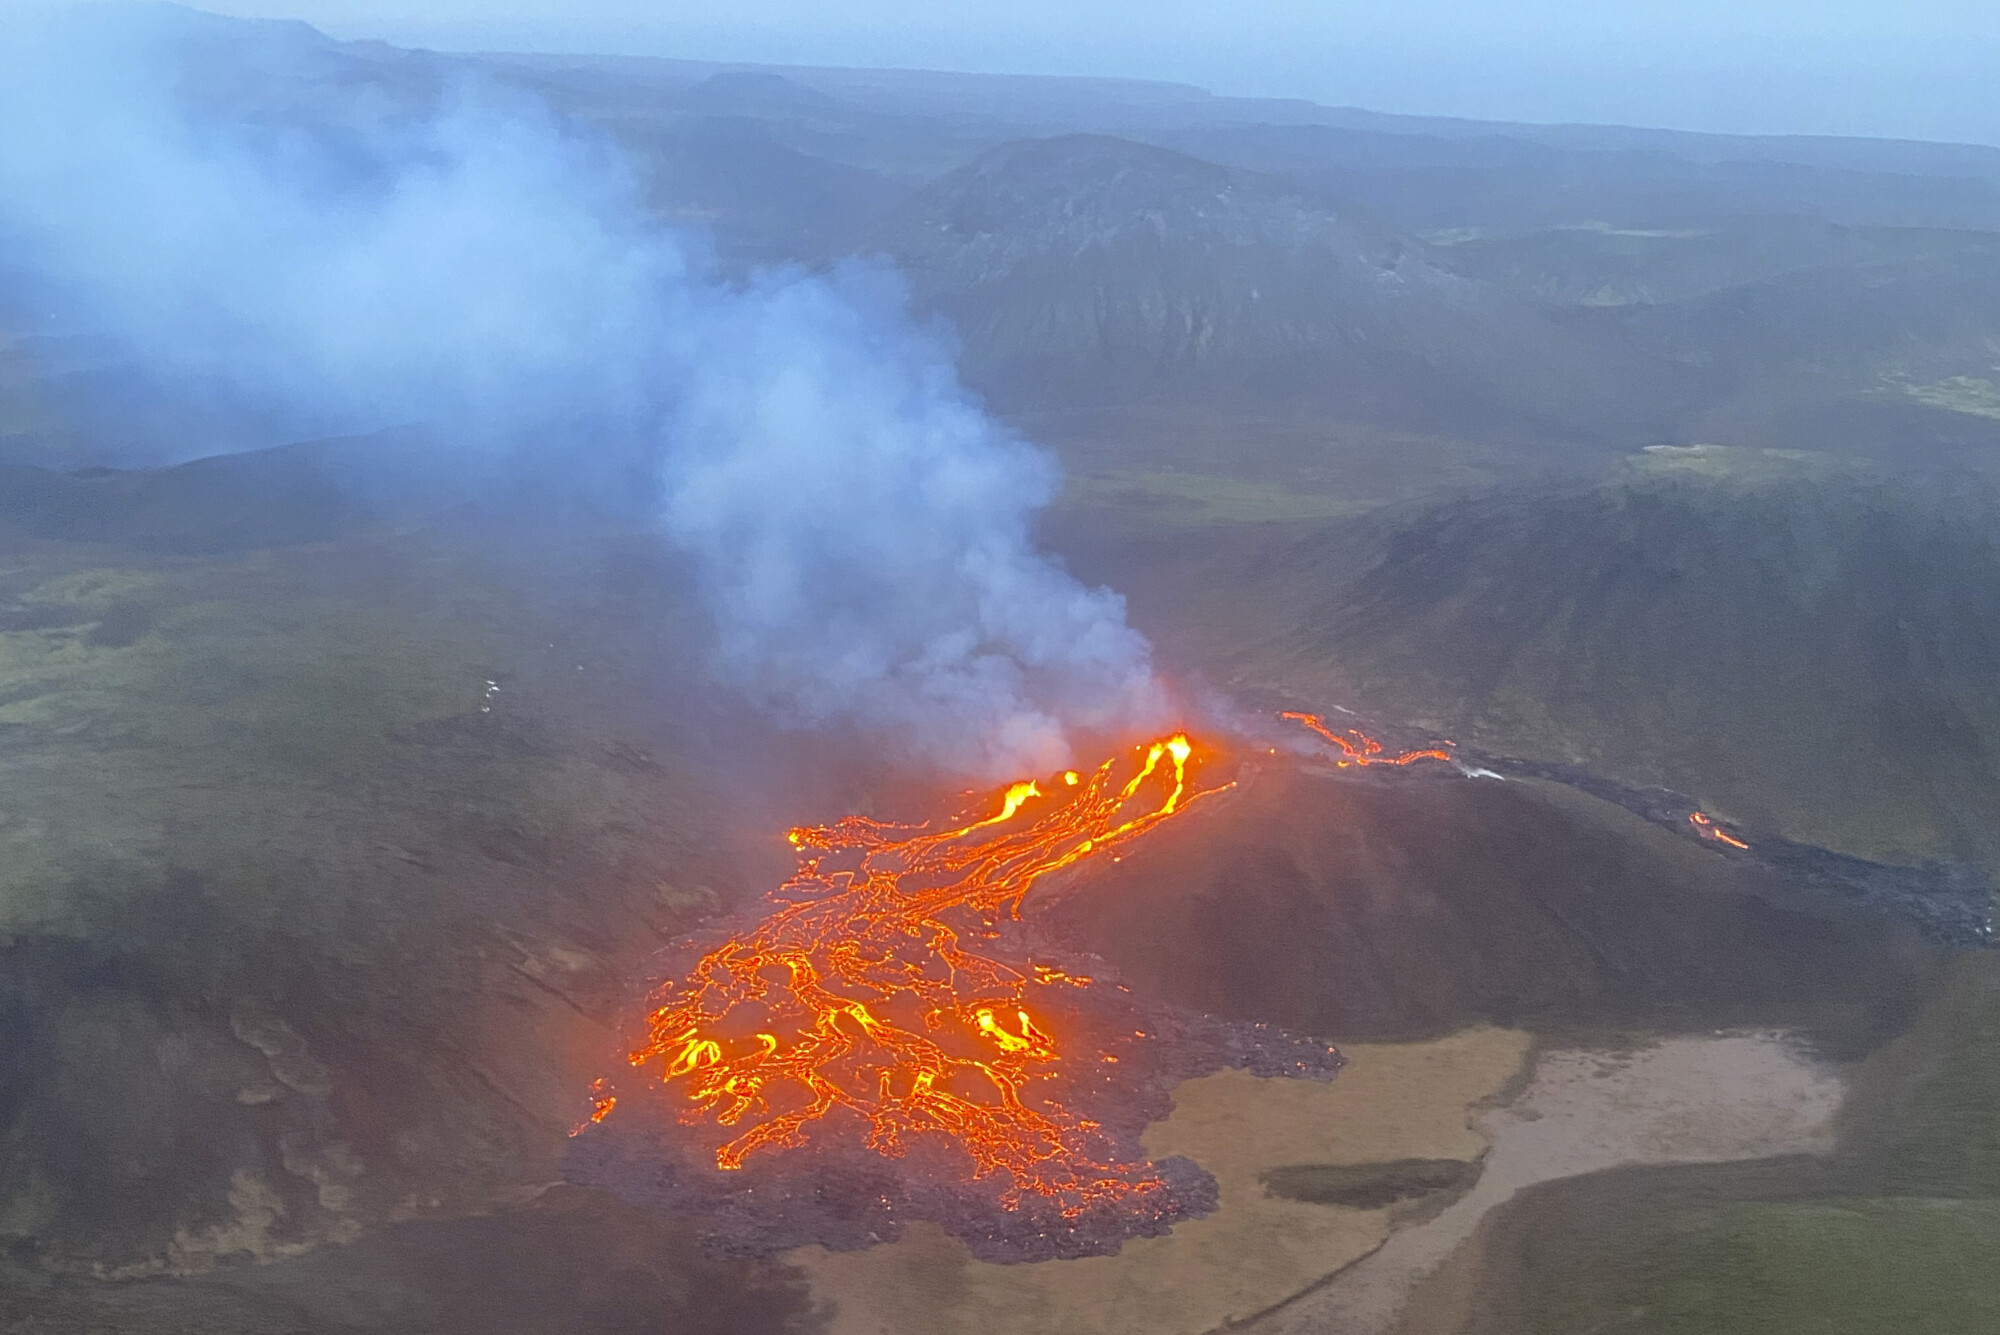 Iceland’s Meteorological Office Reports 2nd Sylingarfell Volcanic Eruption in Two Months